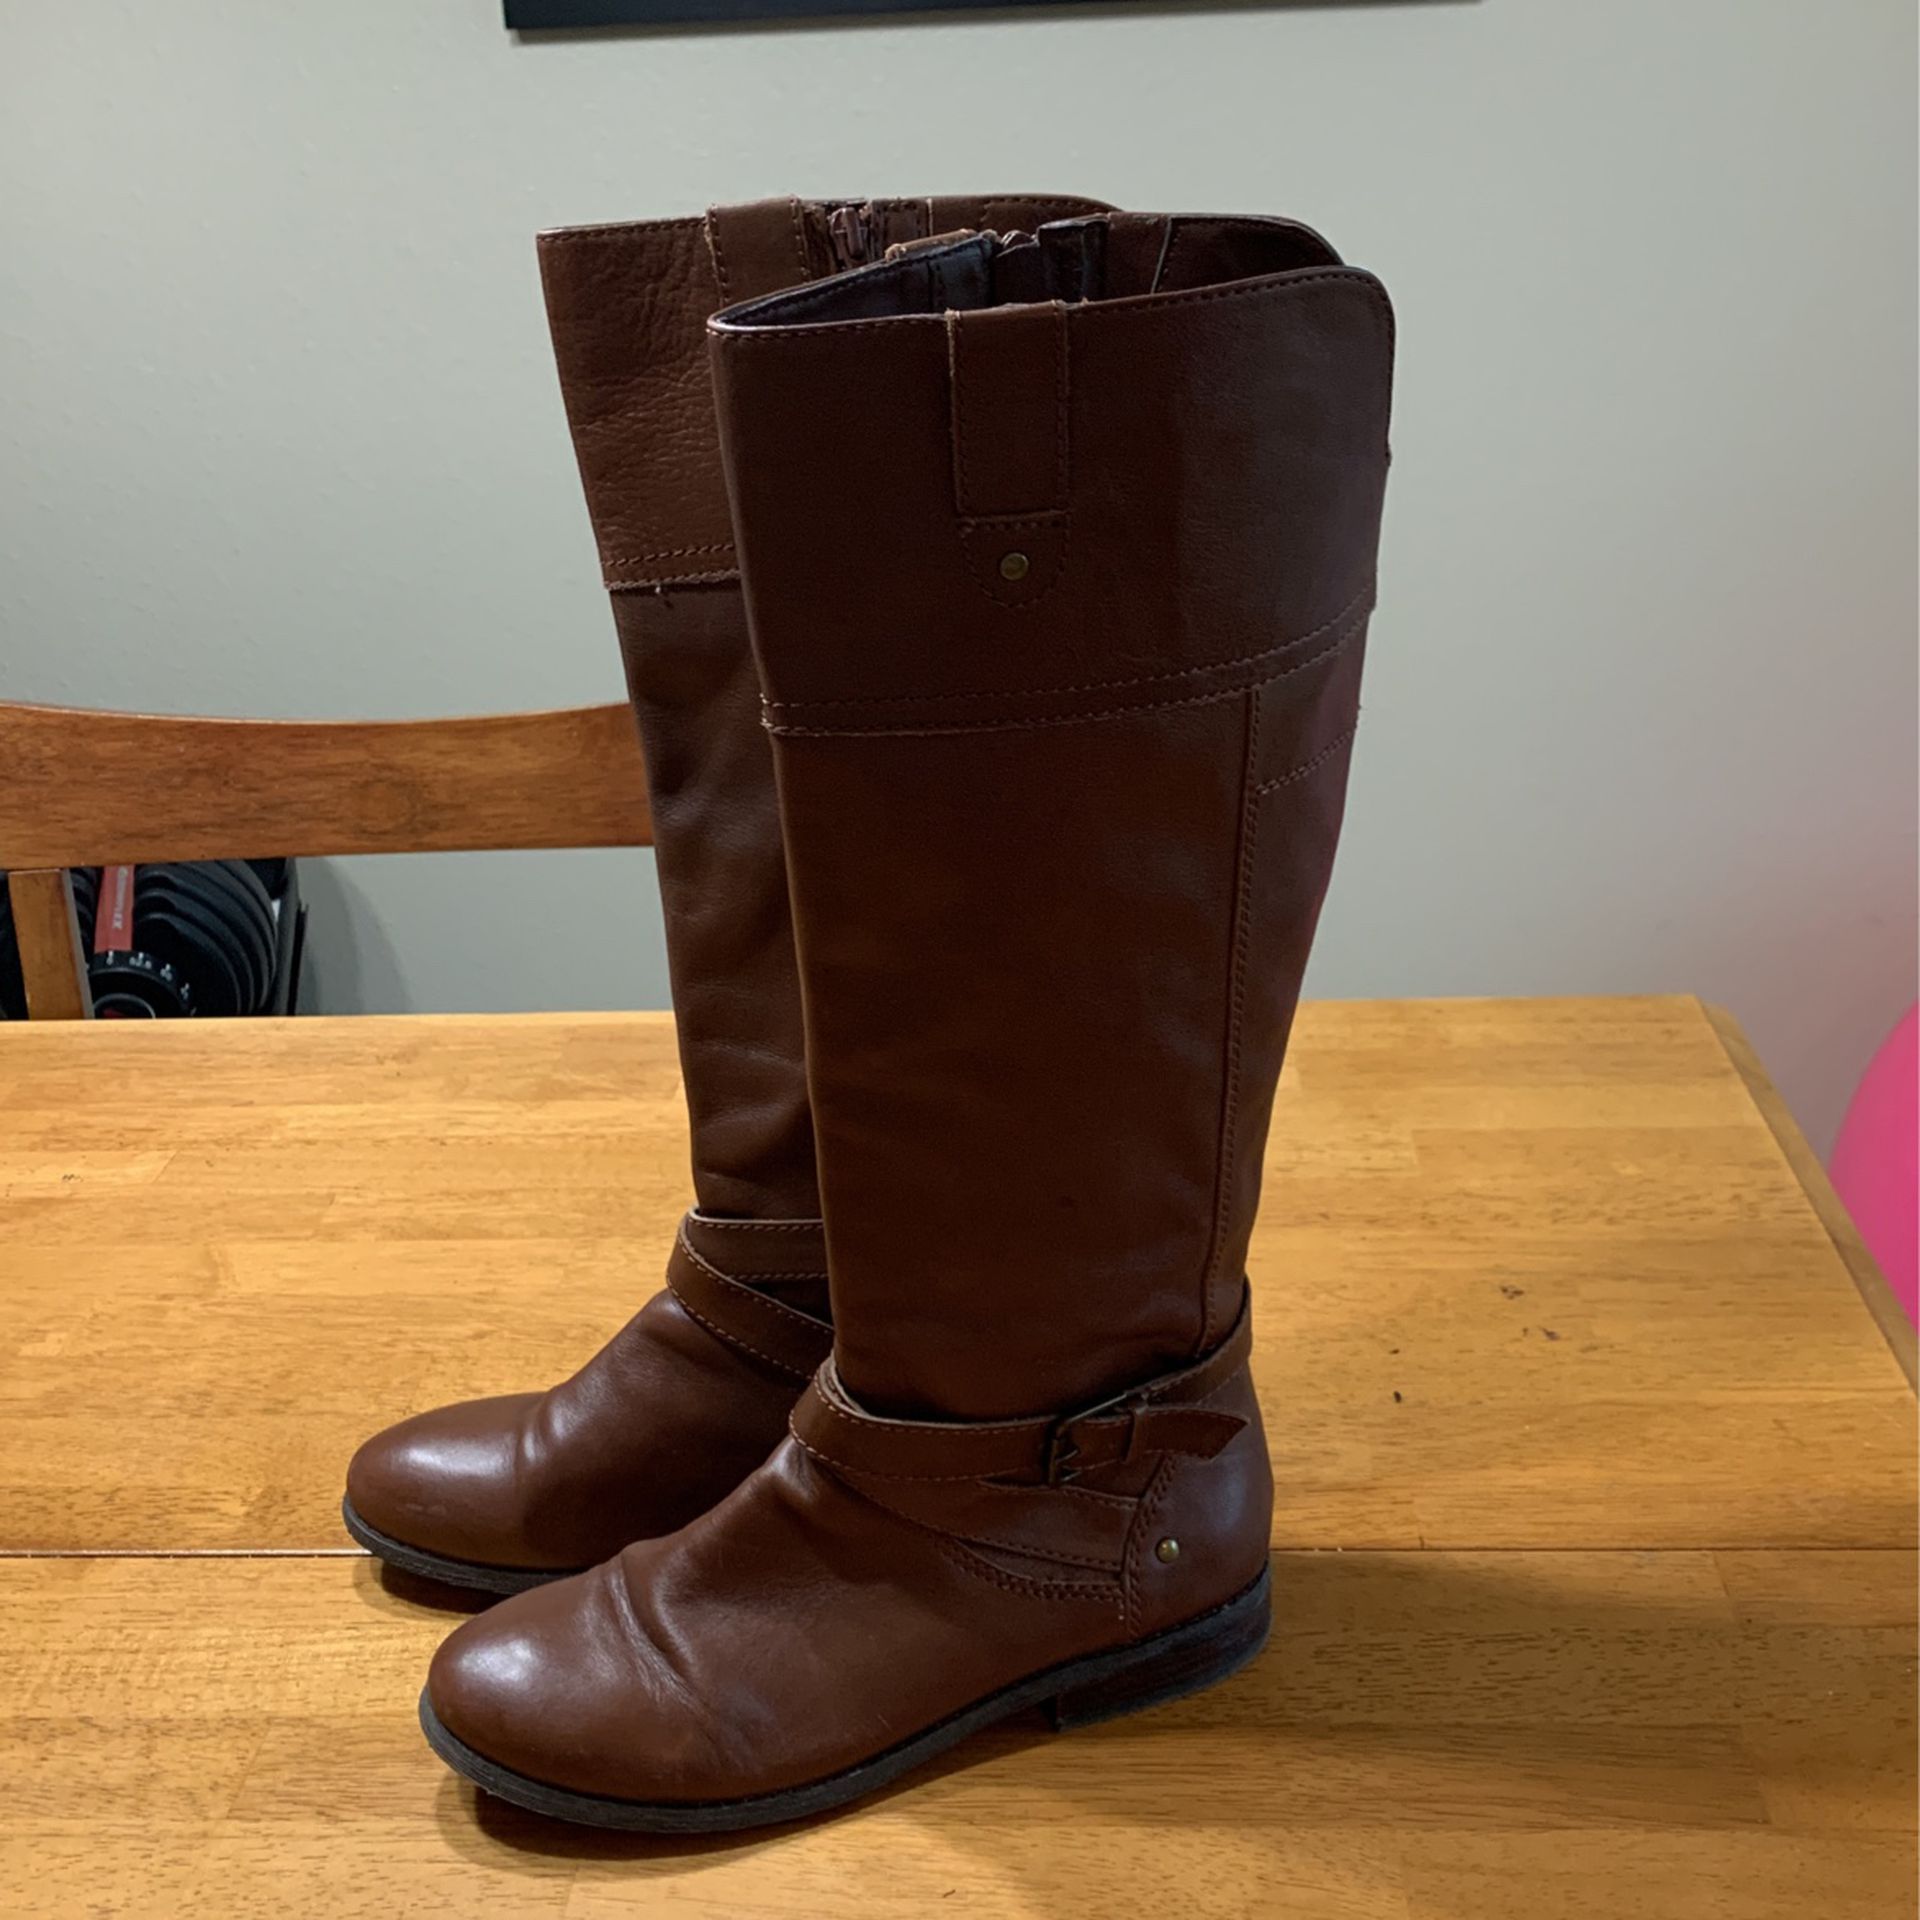 Women’s Size 8 Mark Fisher tall Boots